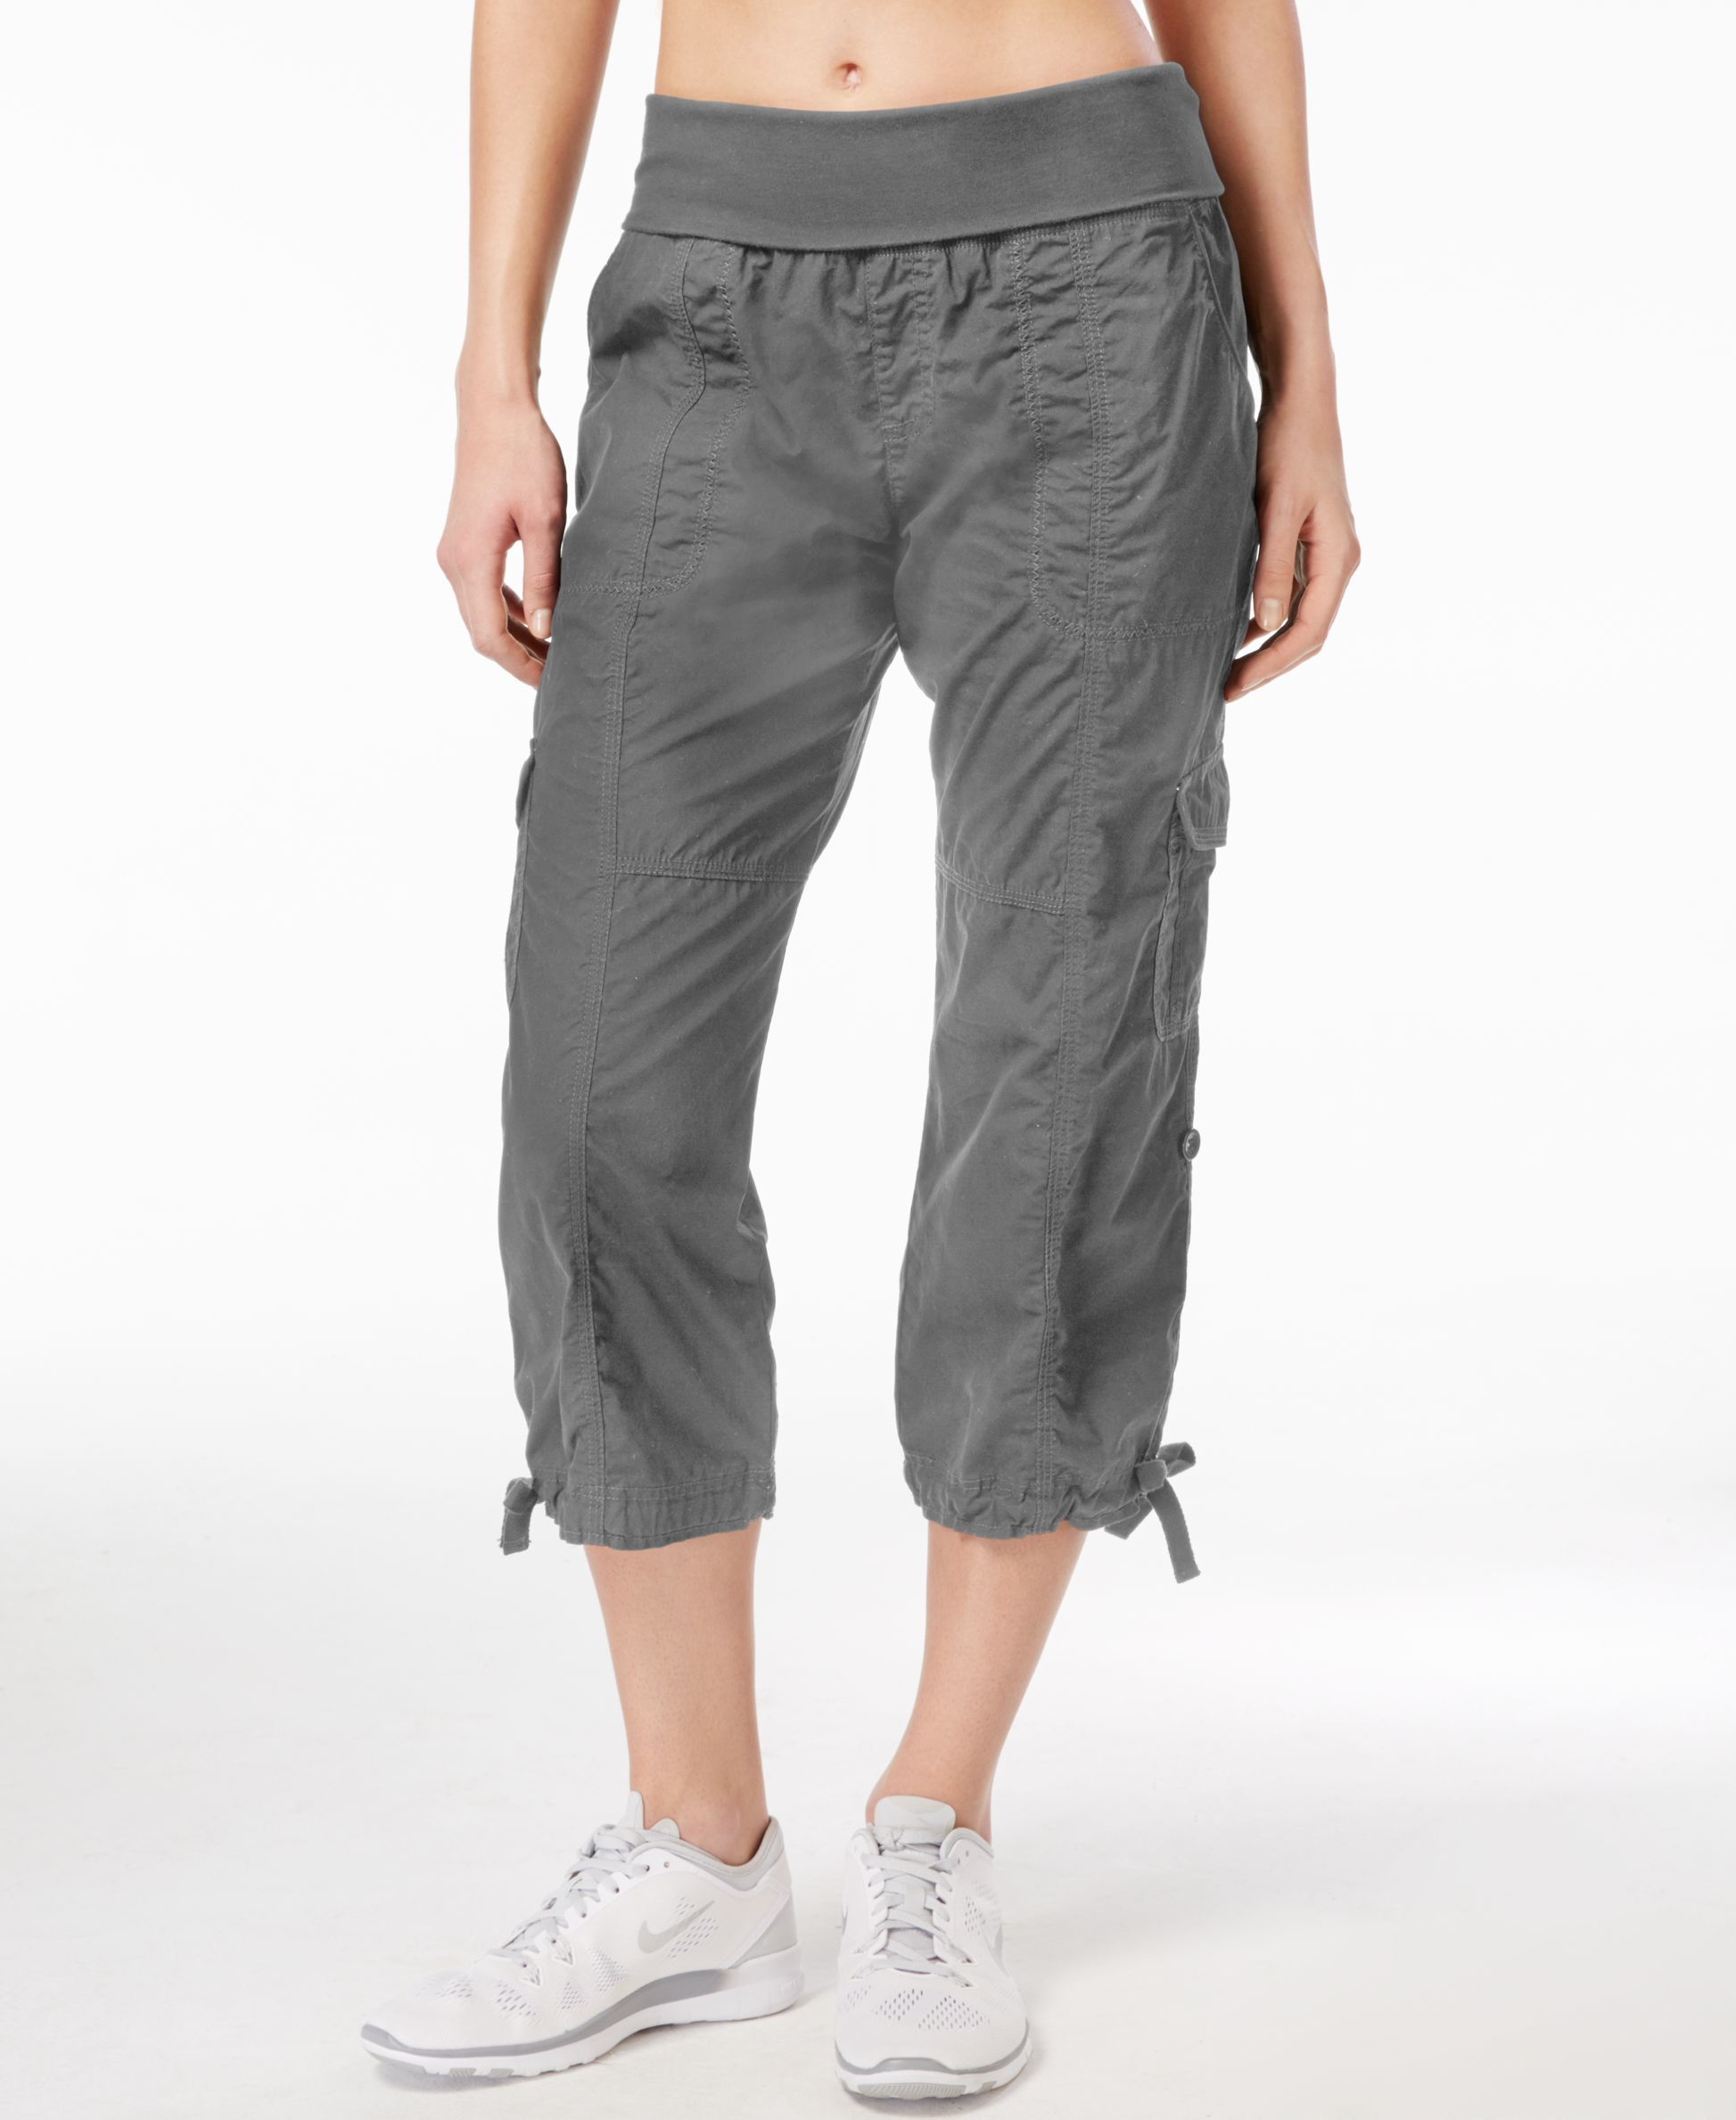 Lyst - Calvin Klein Performance Cargo Cropped Pants in Gray